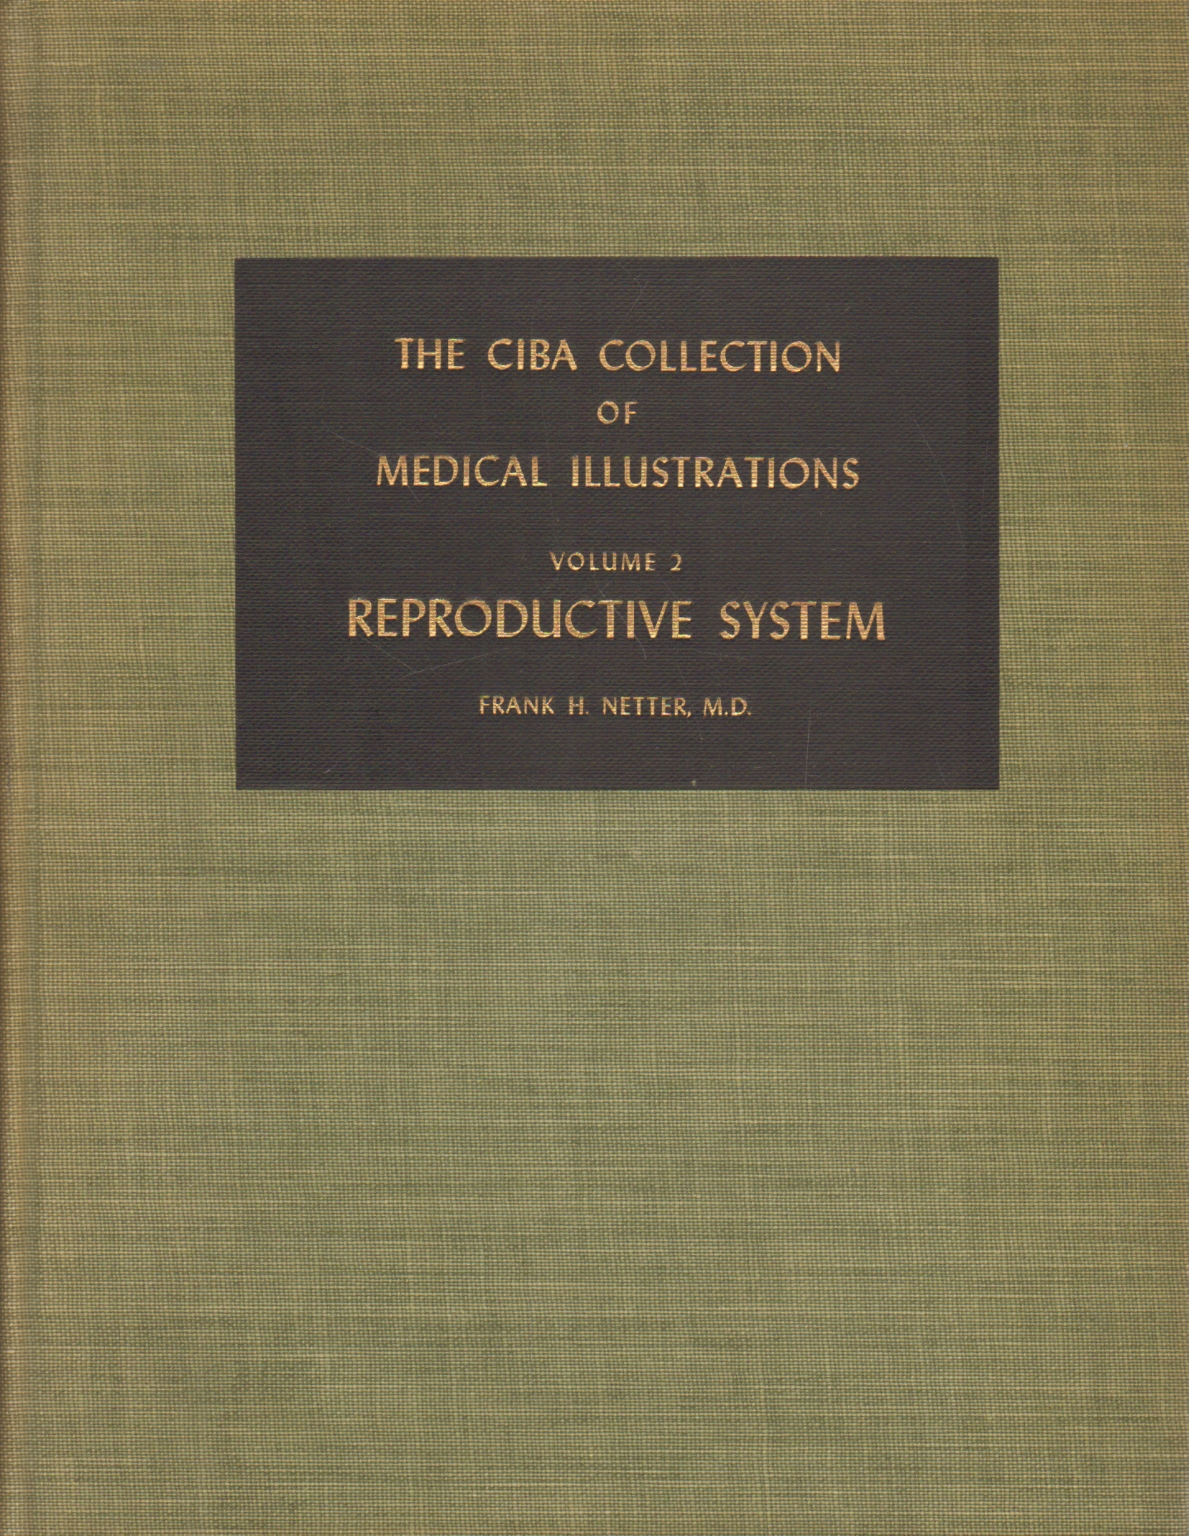 The ciba collection of medical illustrations Volum, Frank H. Netter